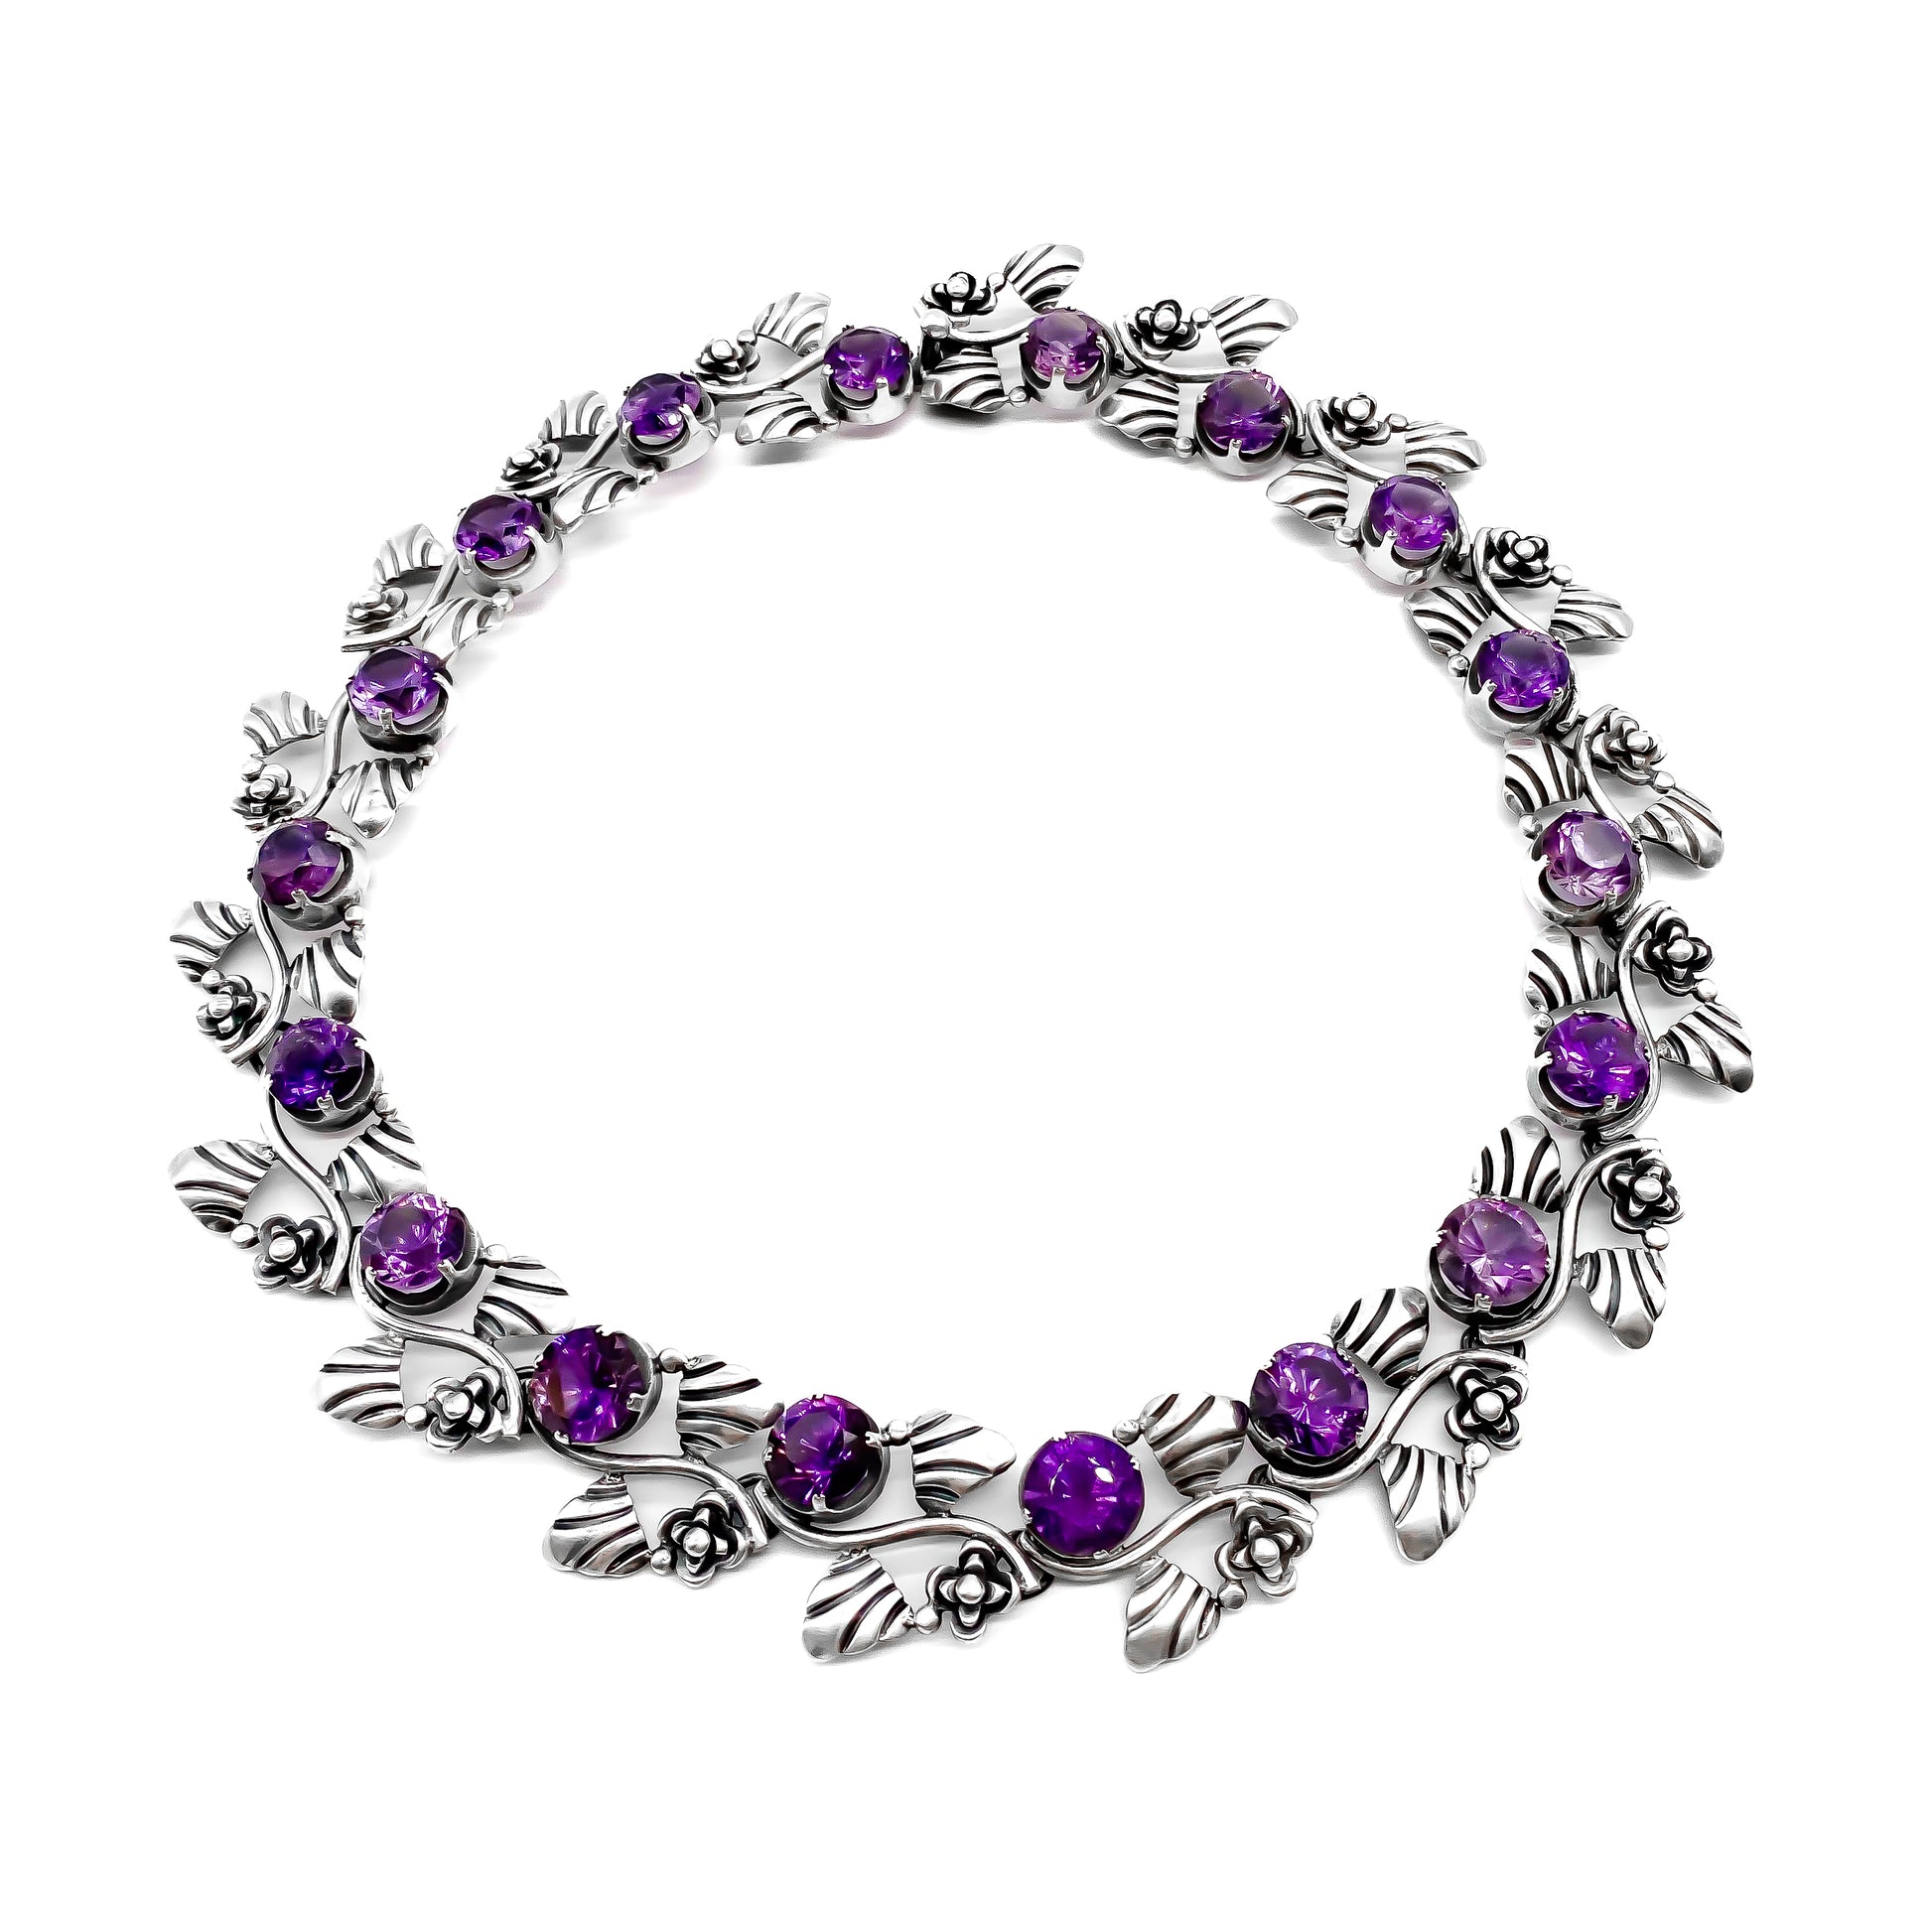 Stunning sterling silver Mexican choker necklace set with eighteen round, faceted amethysts. Circa 1950’s